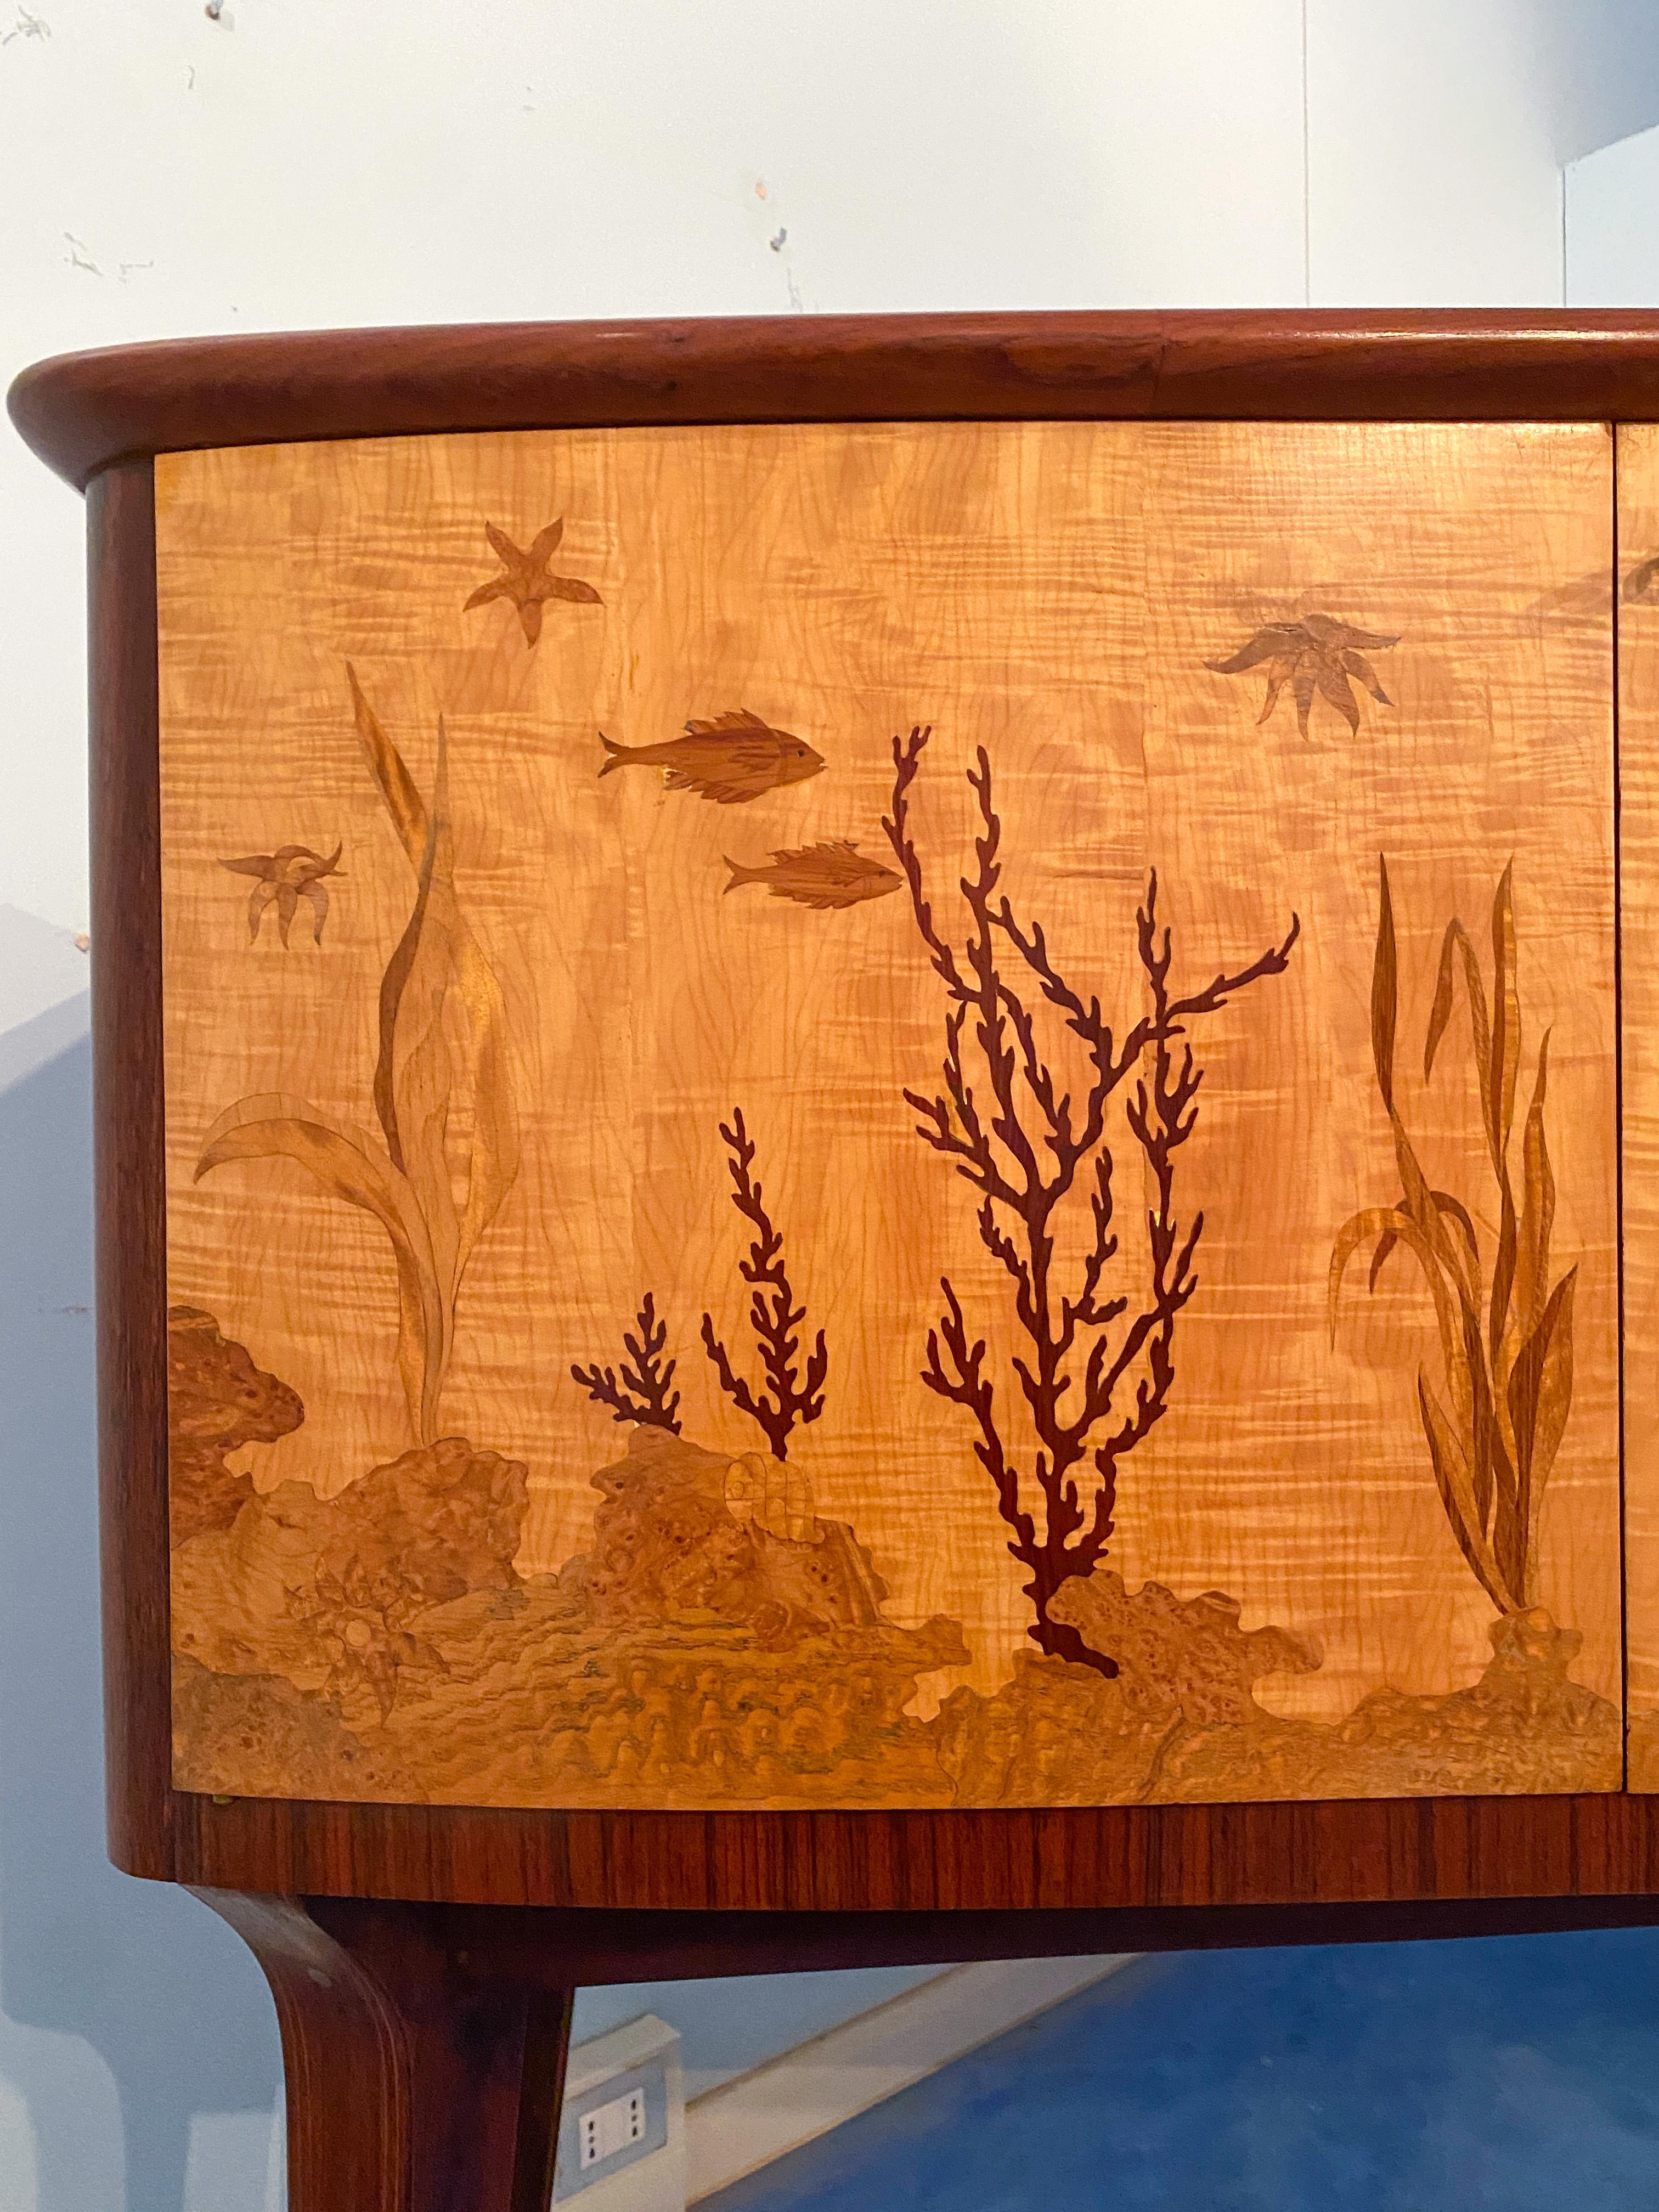 Italian Midcentury Inlaid Maple Sideboard by Andrea Gusmai, 1950s For Sale 5